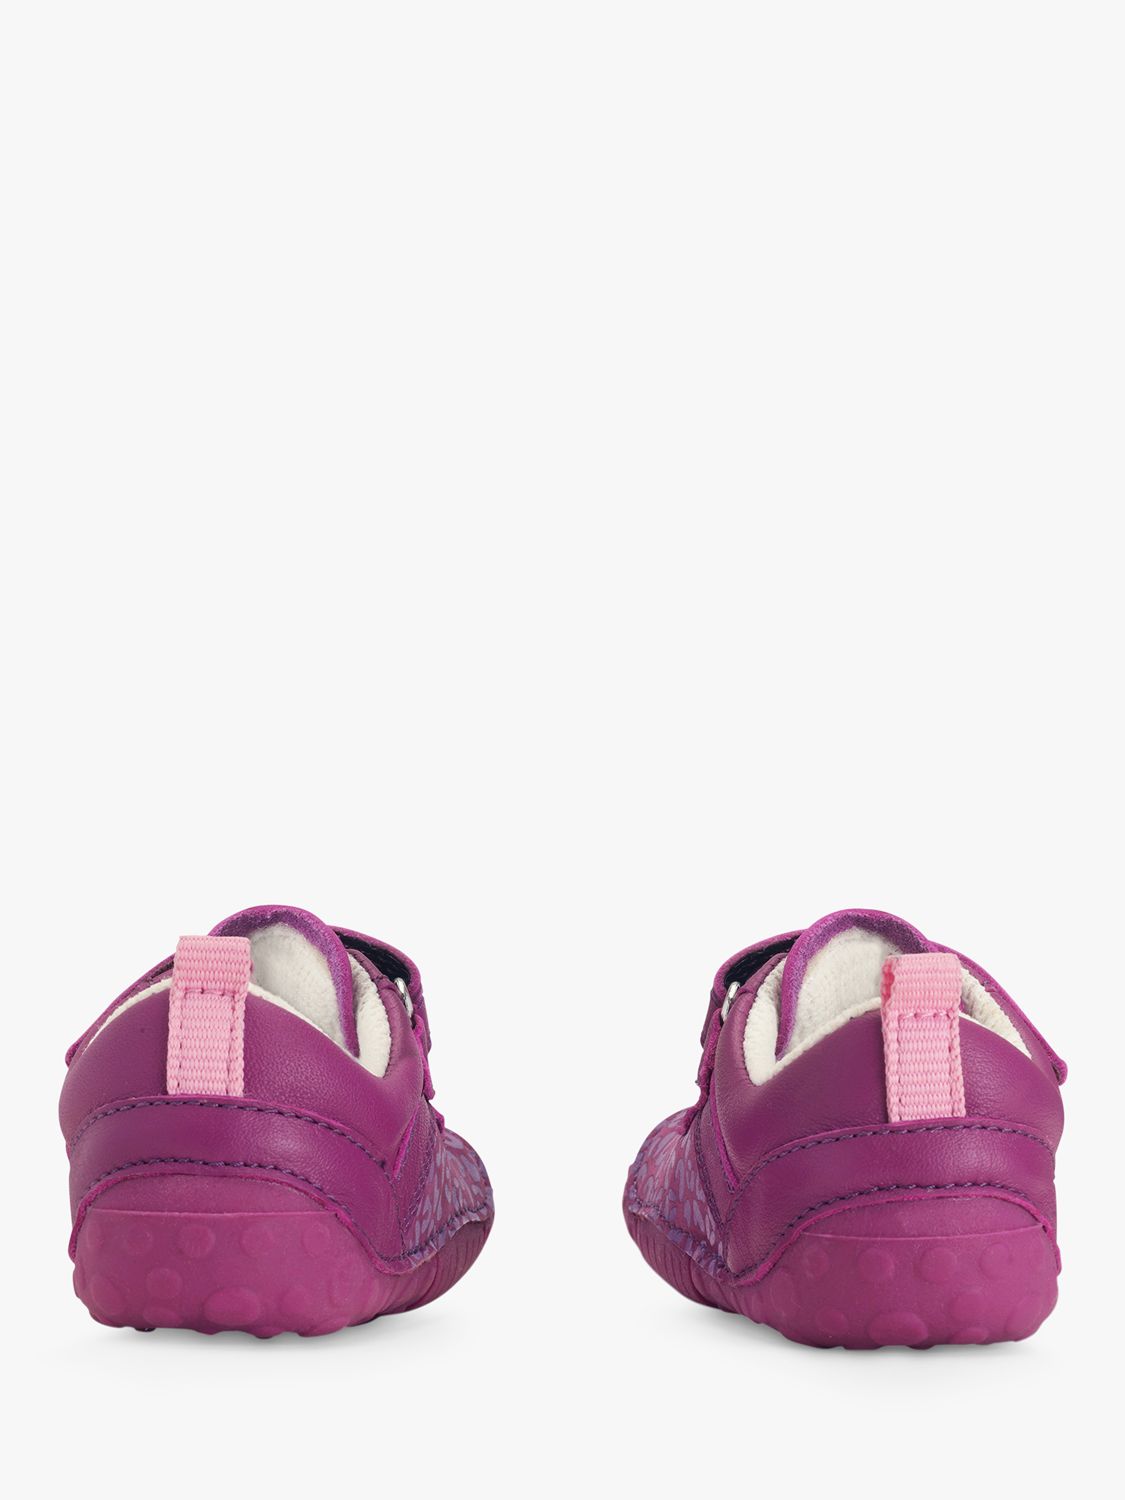 Buy Start-Rite Baby Little Smile Leather Rip Tape Pre Walker Shoes, Berry Online at johnlewis.com